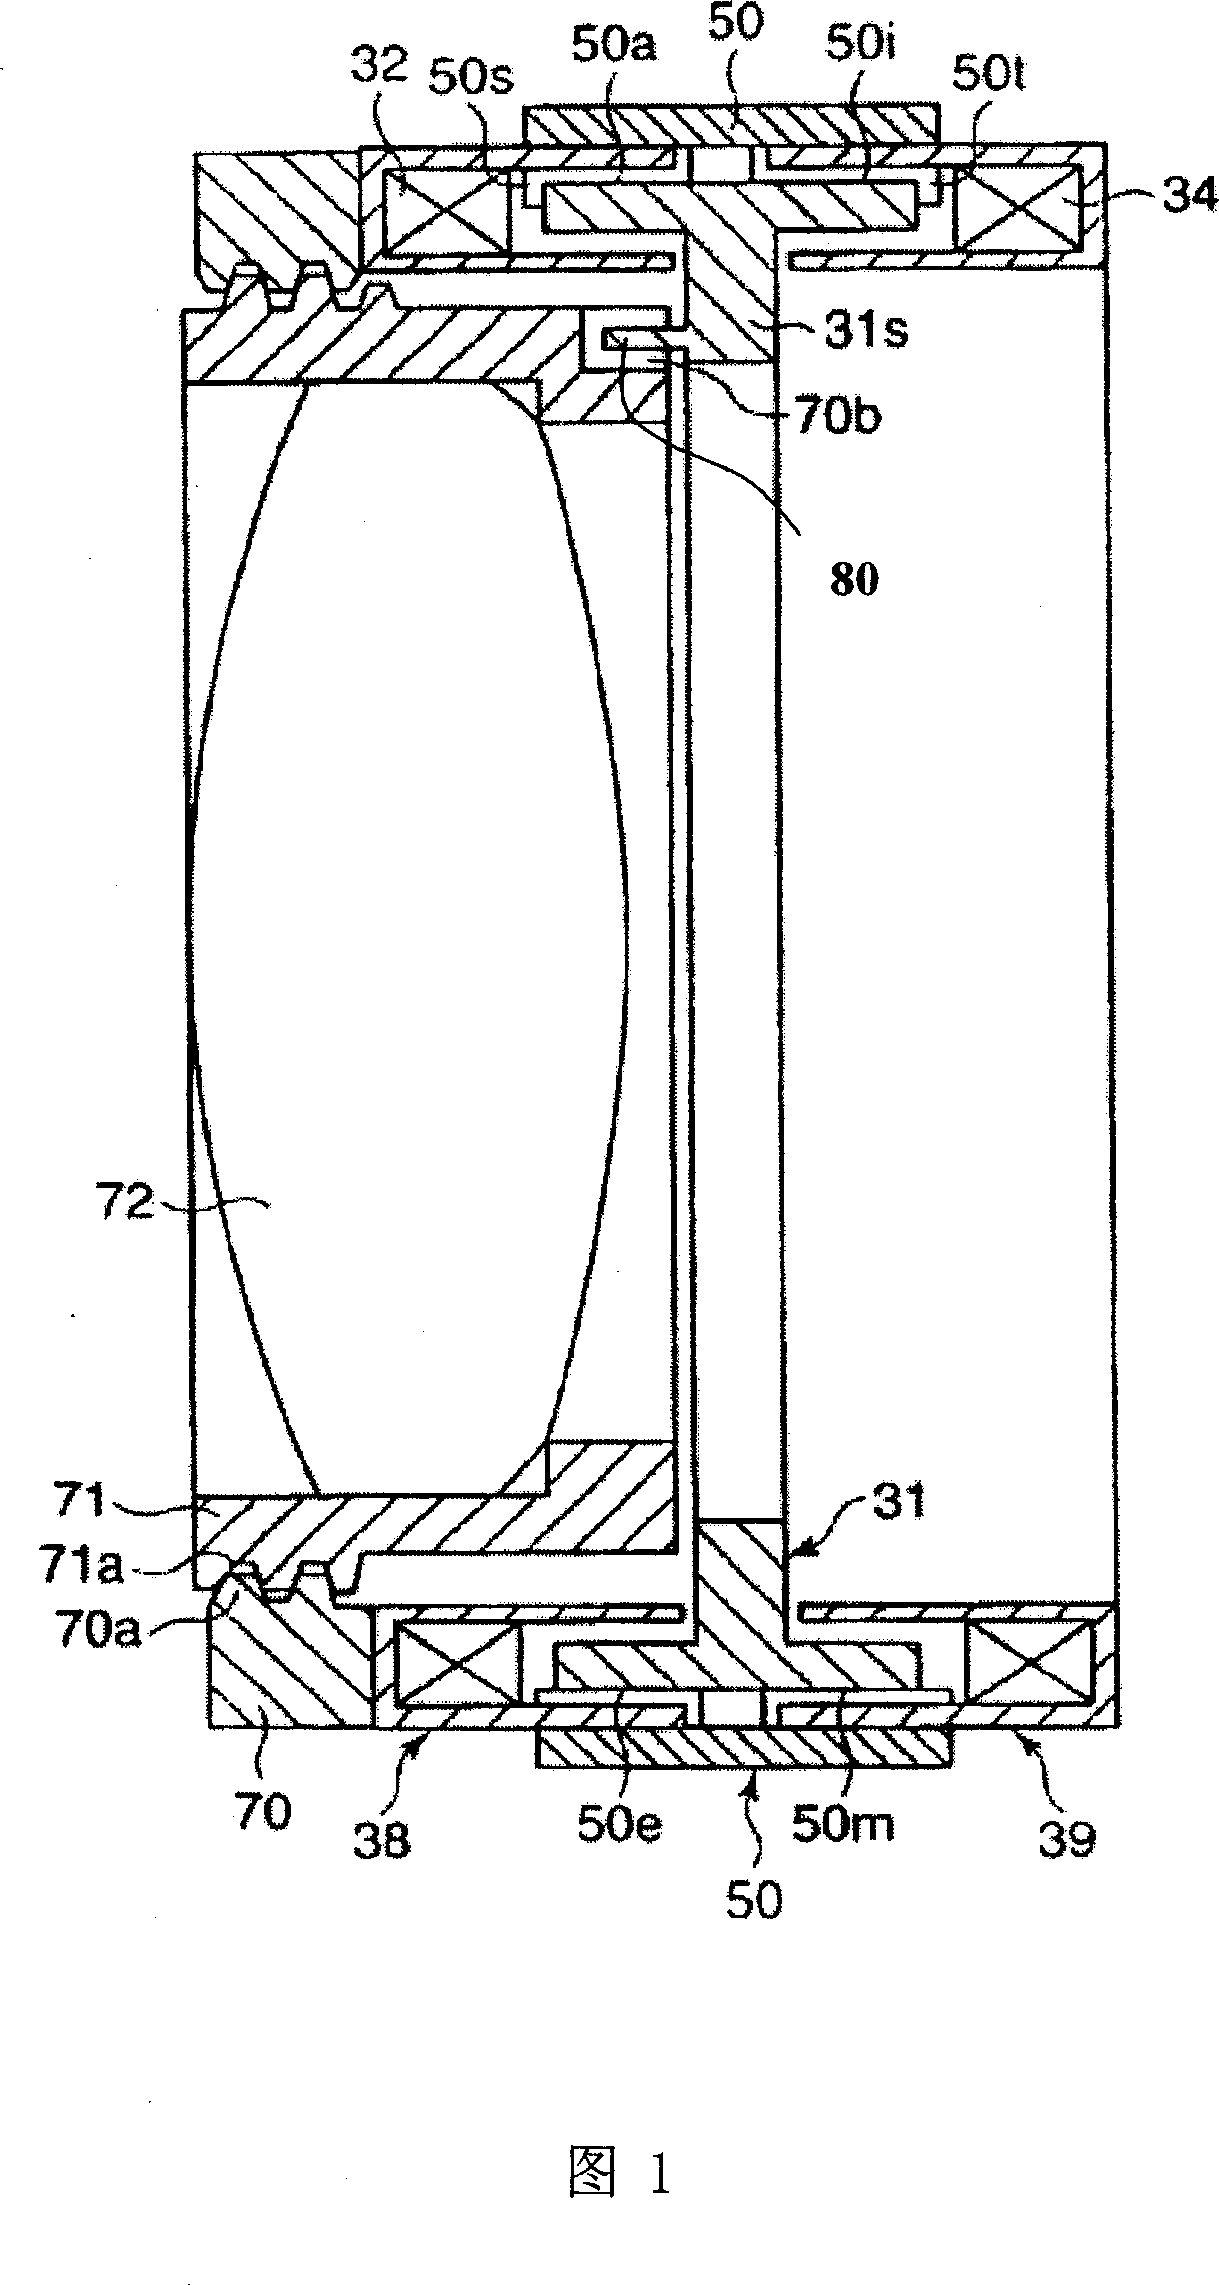 Photographic camera focusing device for mobile phones